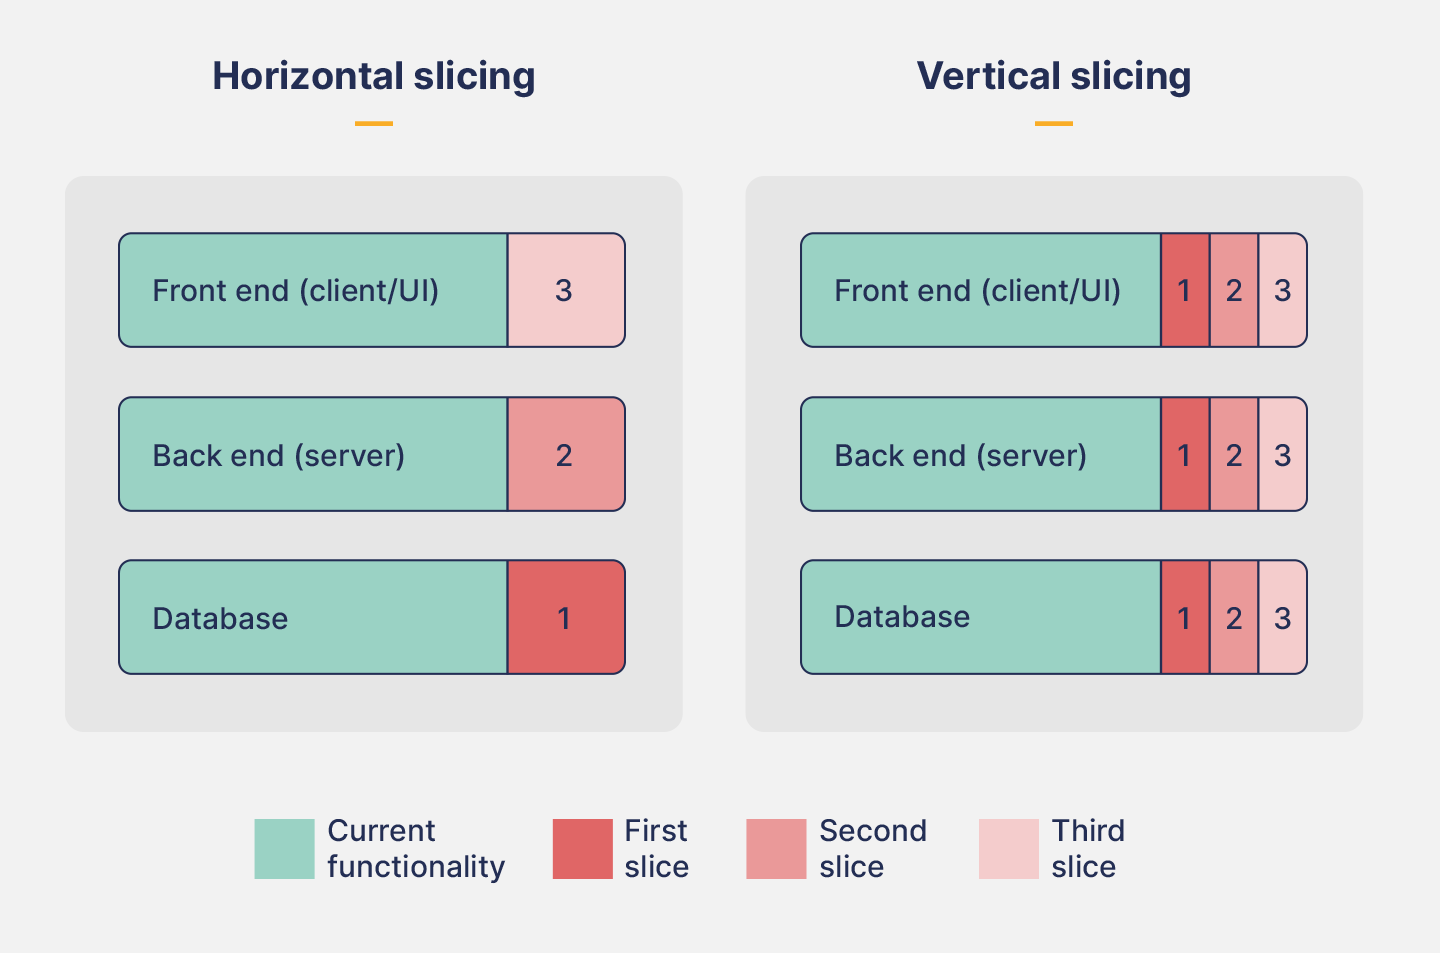 Diagram showing horizontal vs. vertical slicing for a new feature